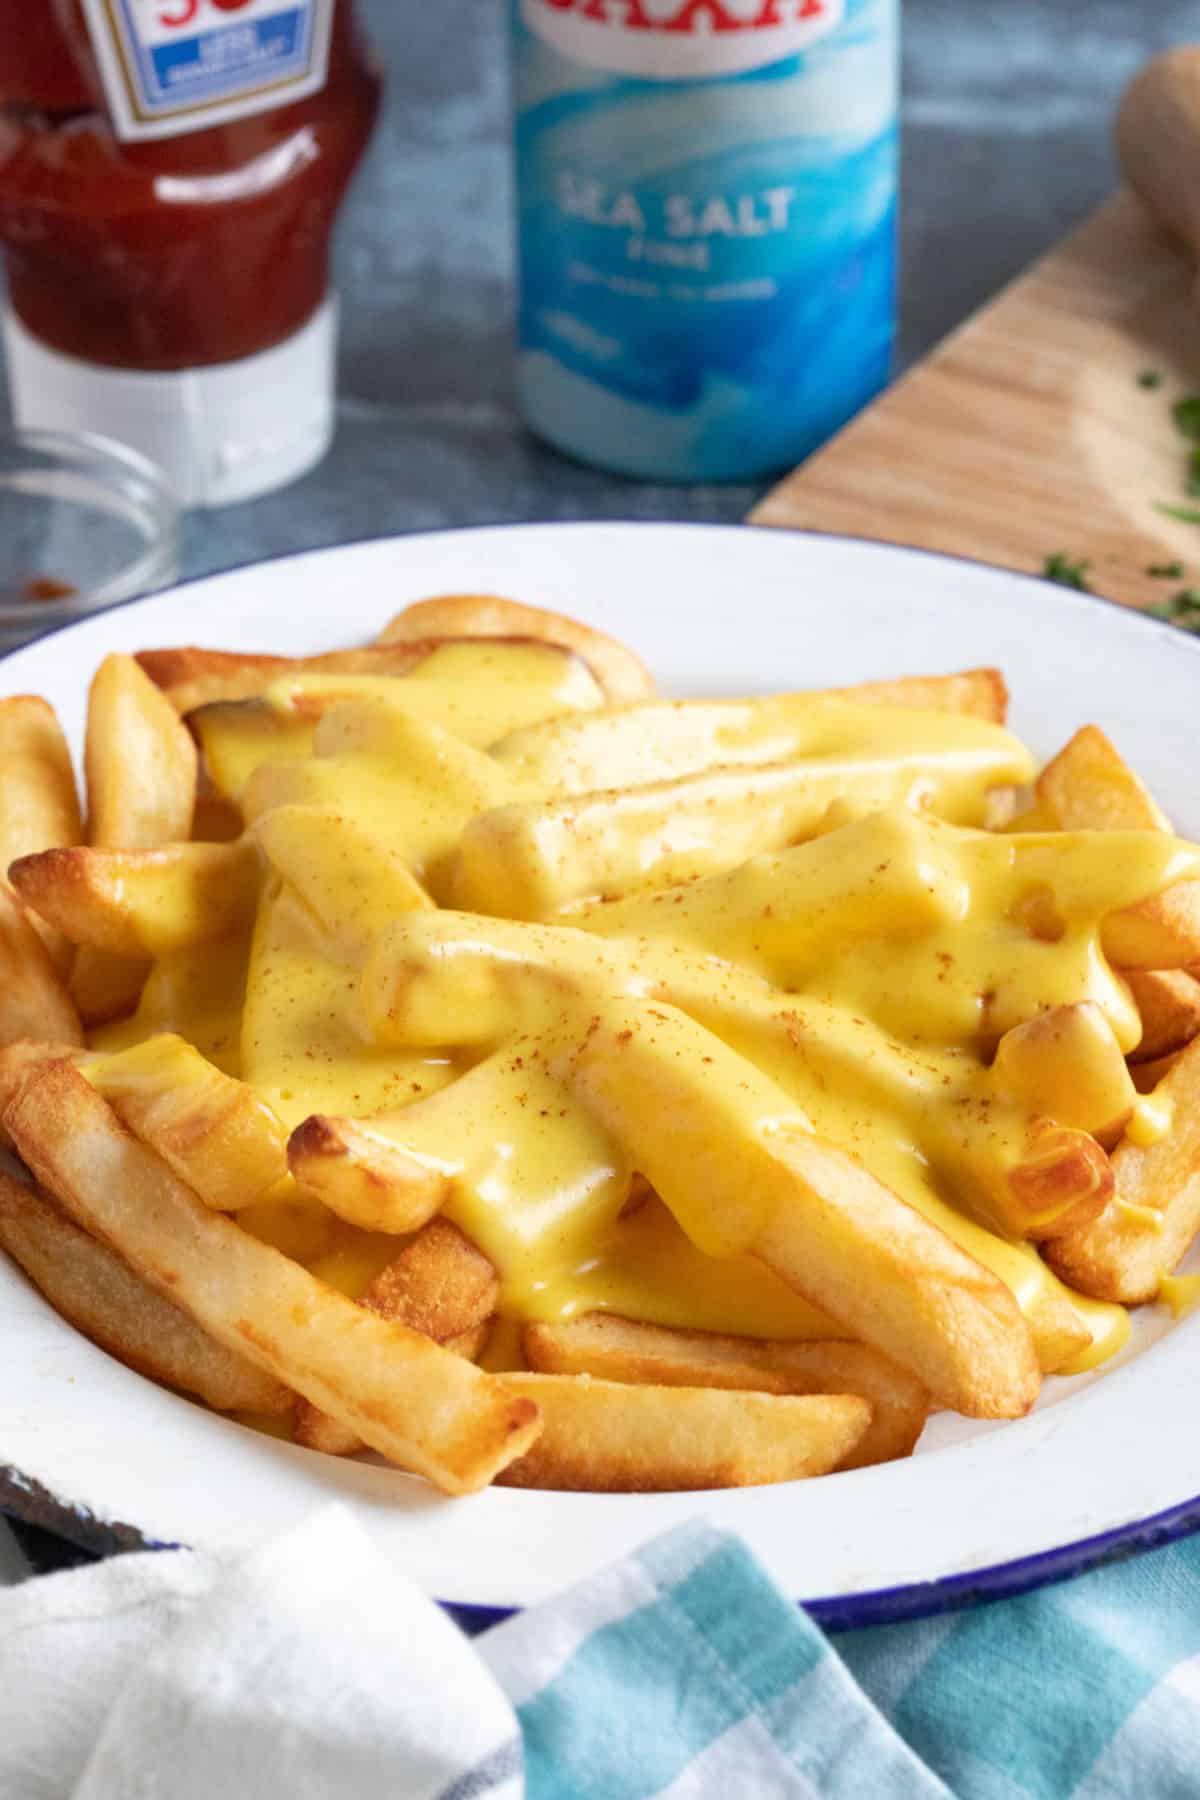 Cheesy chips with salt and ketchup.